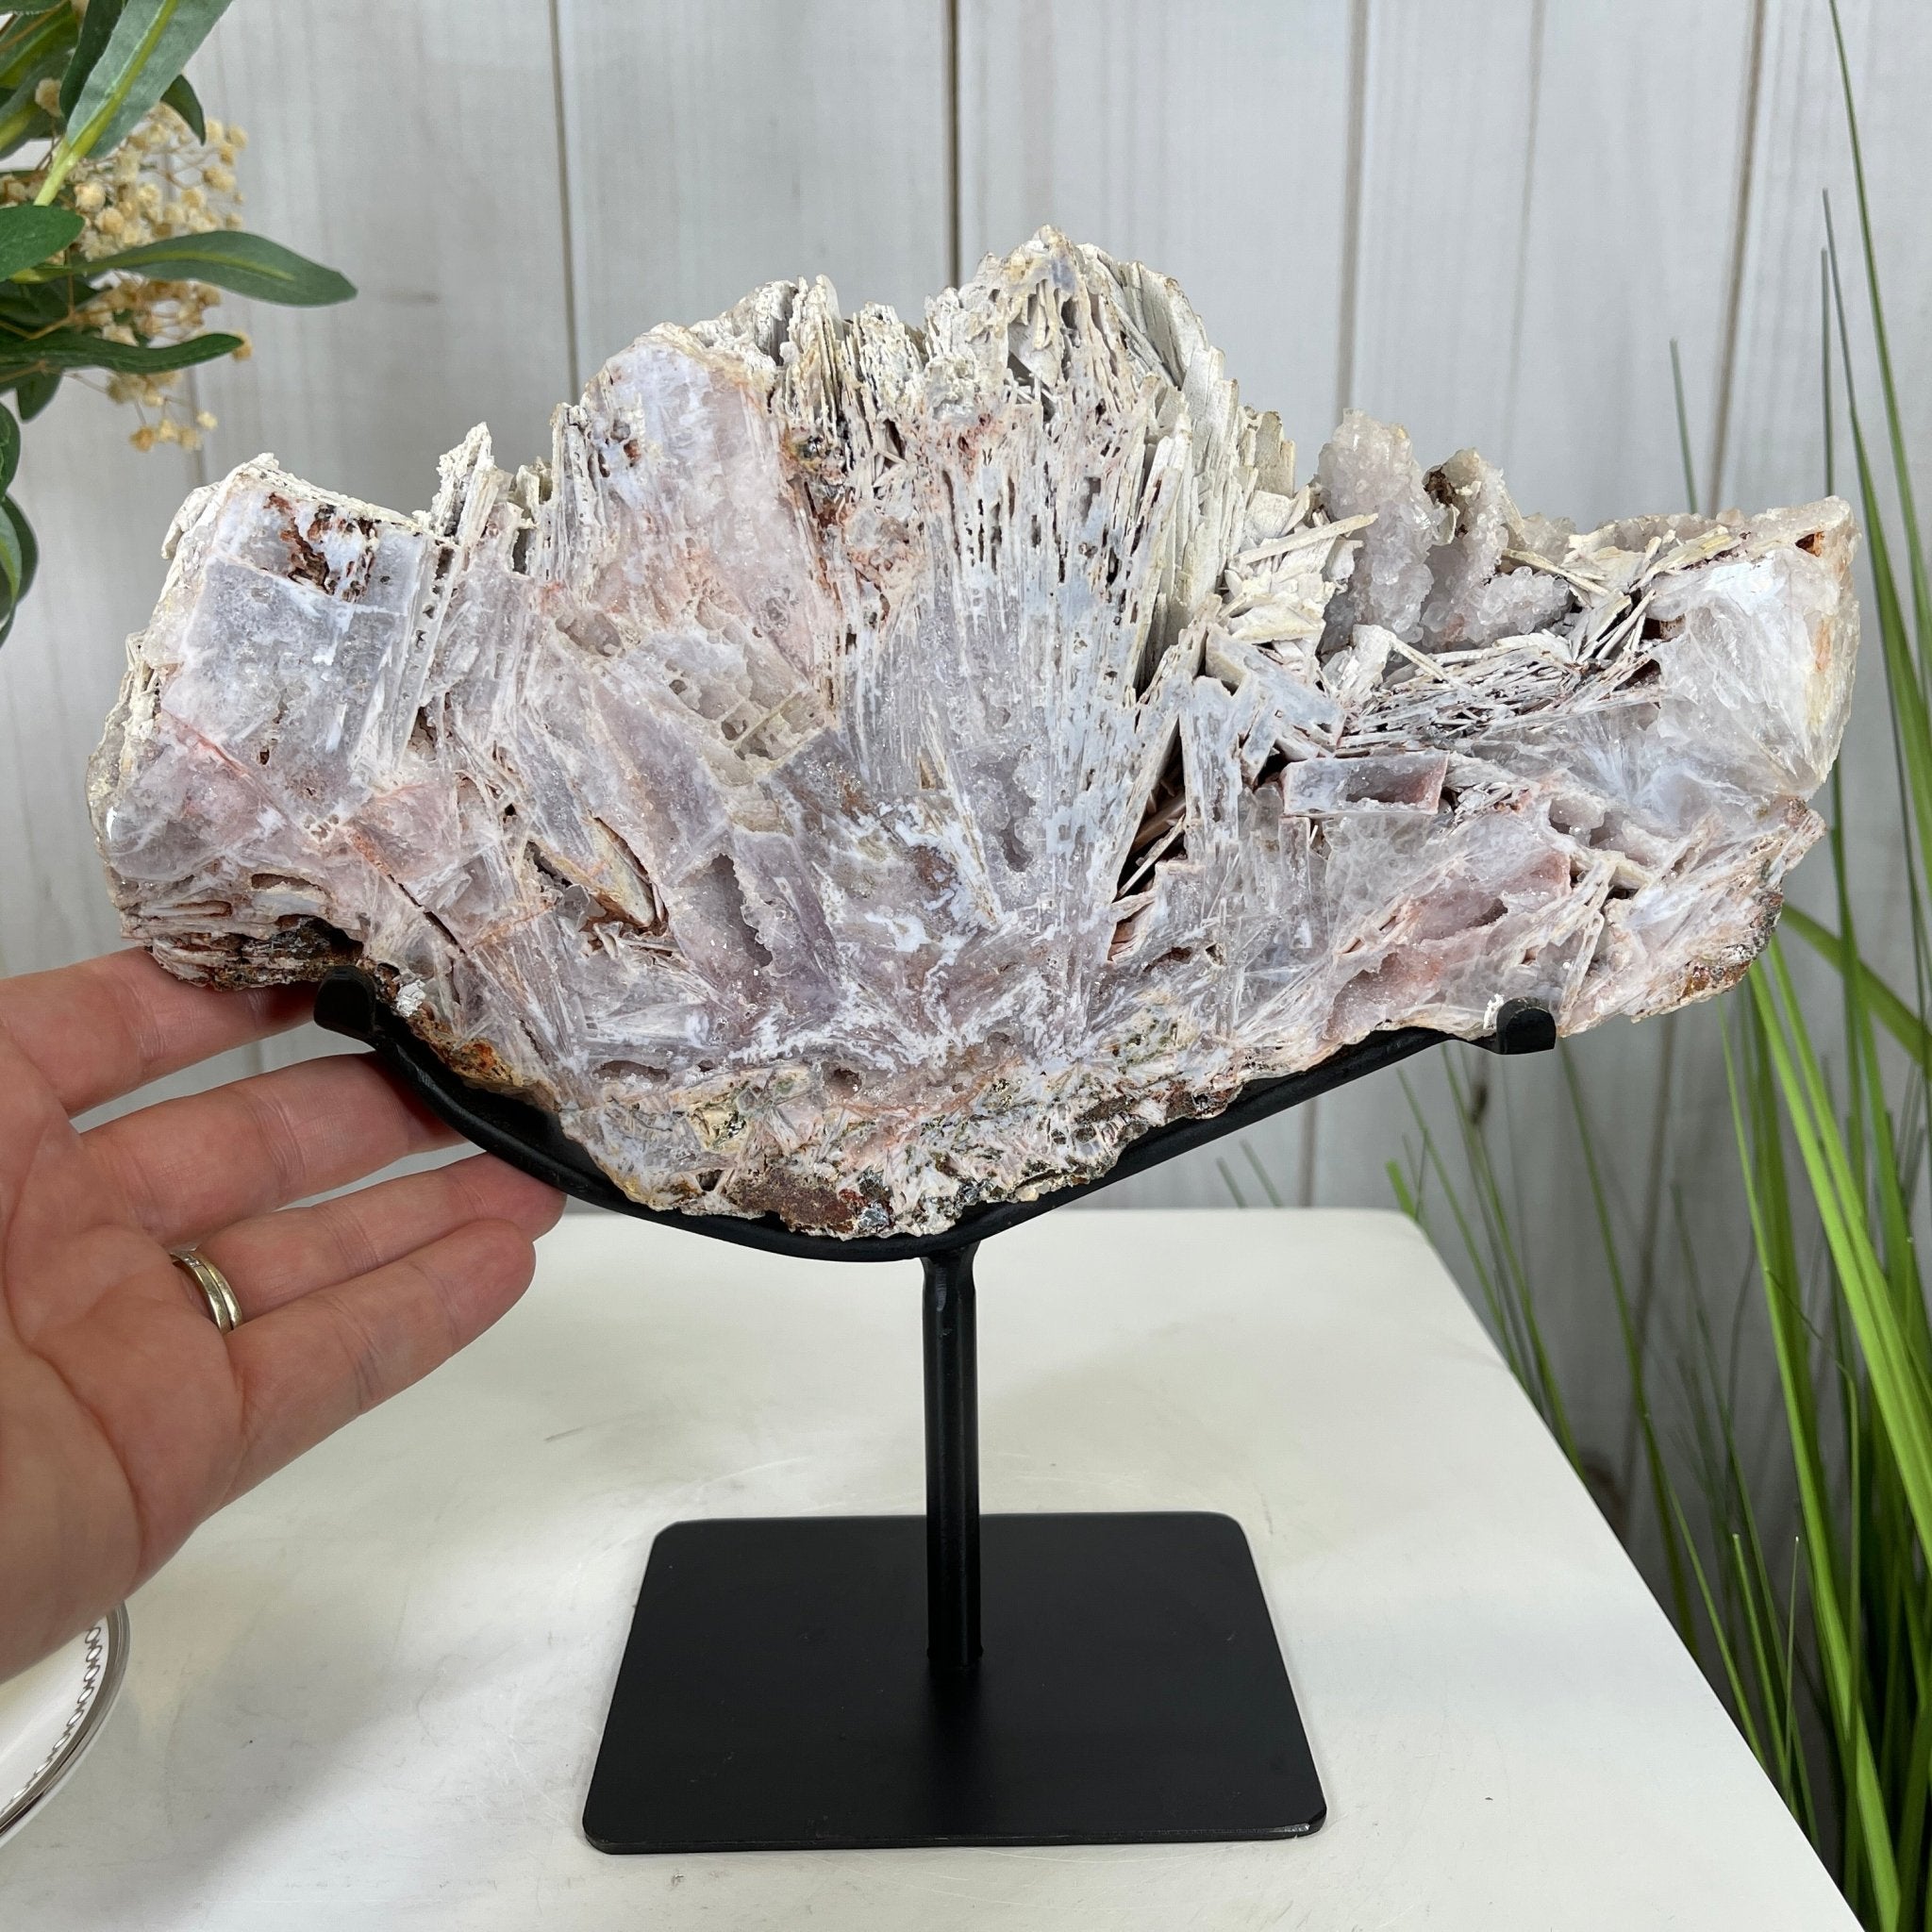 Polished Pink Amethyst Slice on a Stand, 4.7 lbs, 9.75" Tall #5743-0006 by Brazil Gems - Brazil GemsBrazil GemsPolished Pink Amethyst Slice on a Stand, 4.7 lbs, 9.75" Tall #5743-0006 by Brazil GemsSlices on Fixed Bases5743-0006